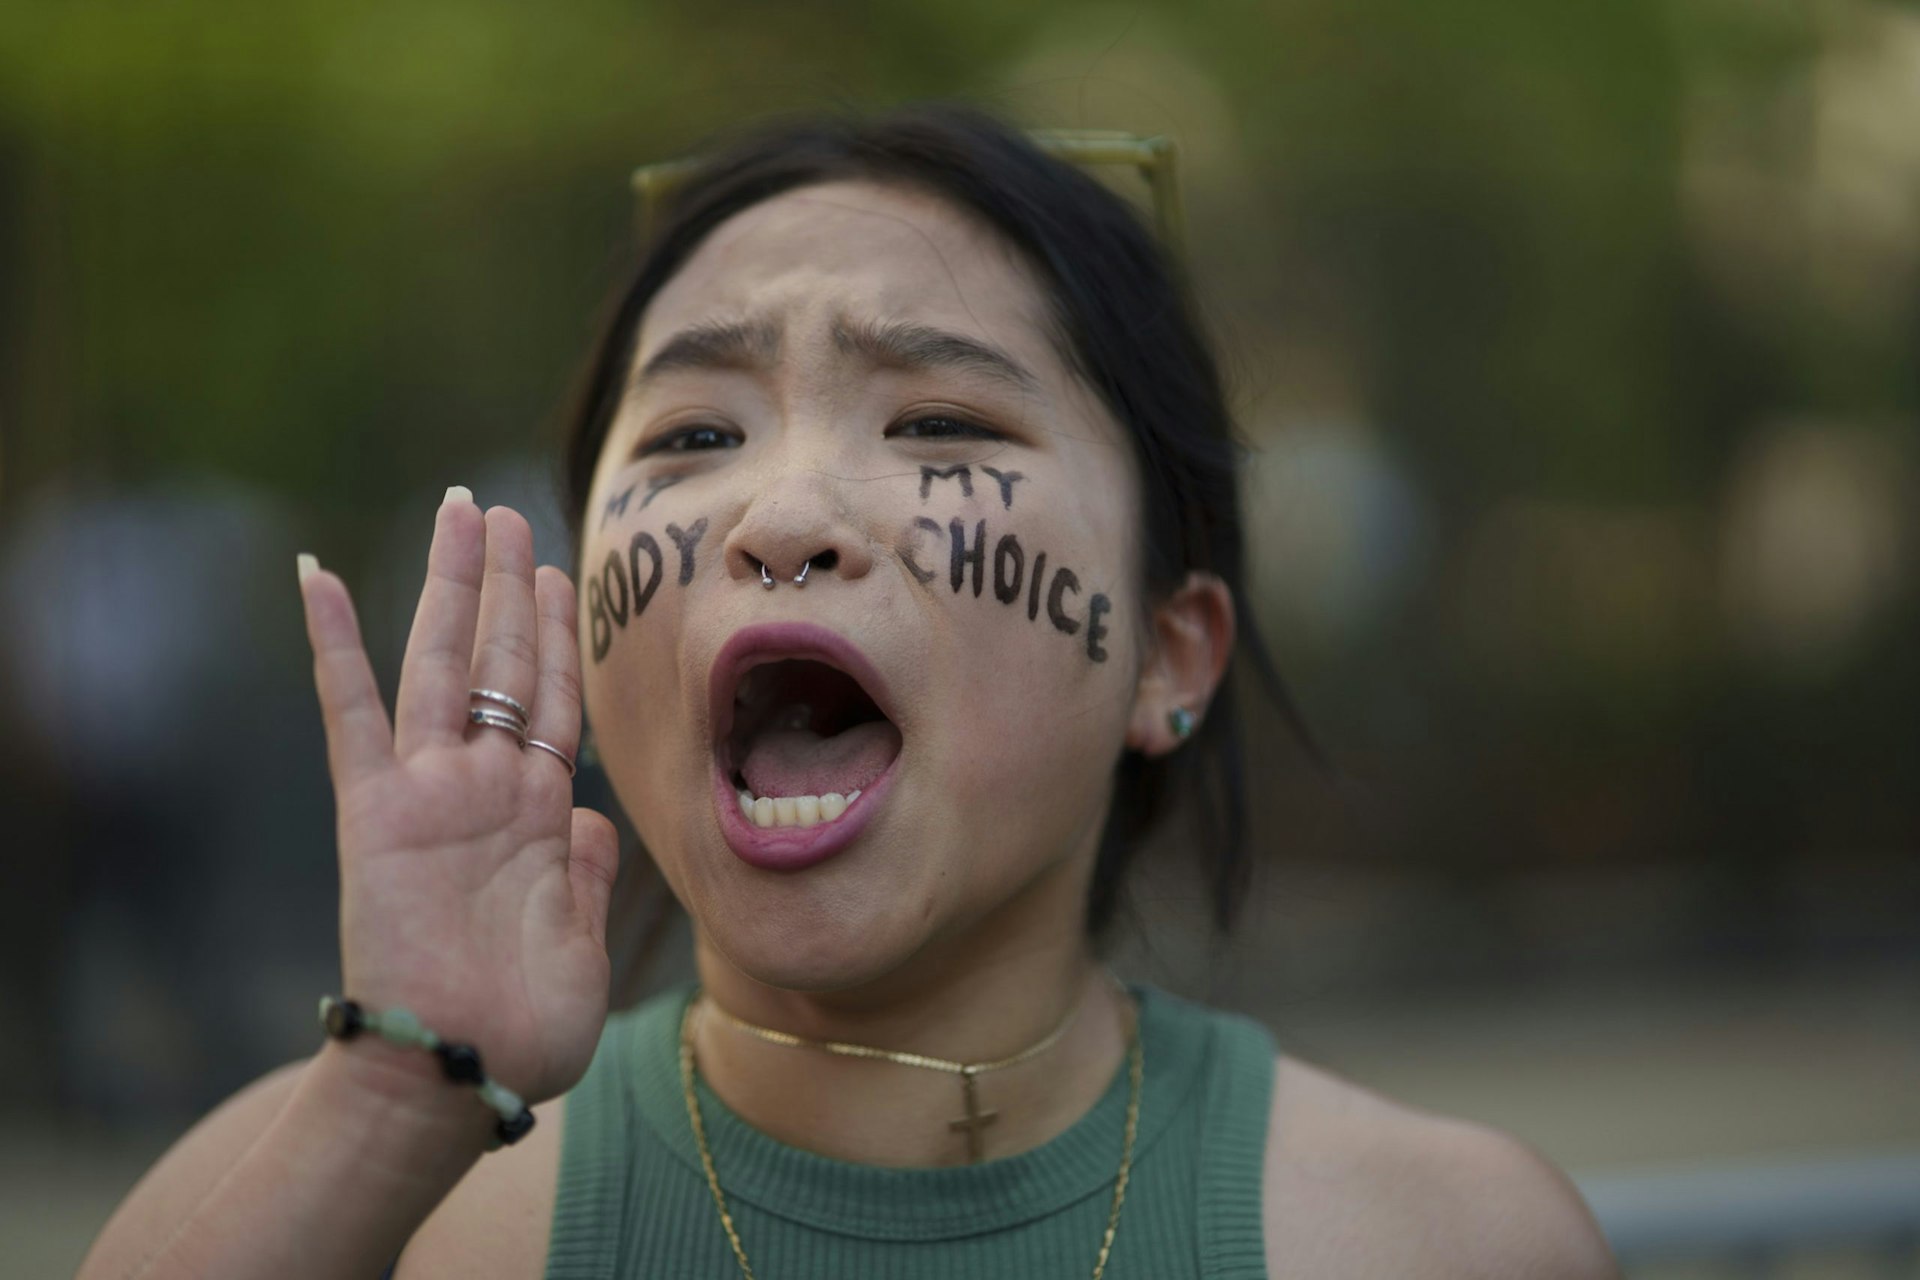 Photos capturing the abortion rights protests in Washington